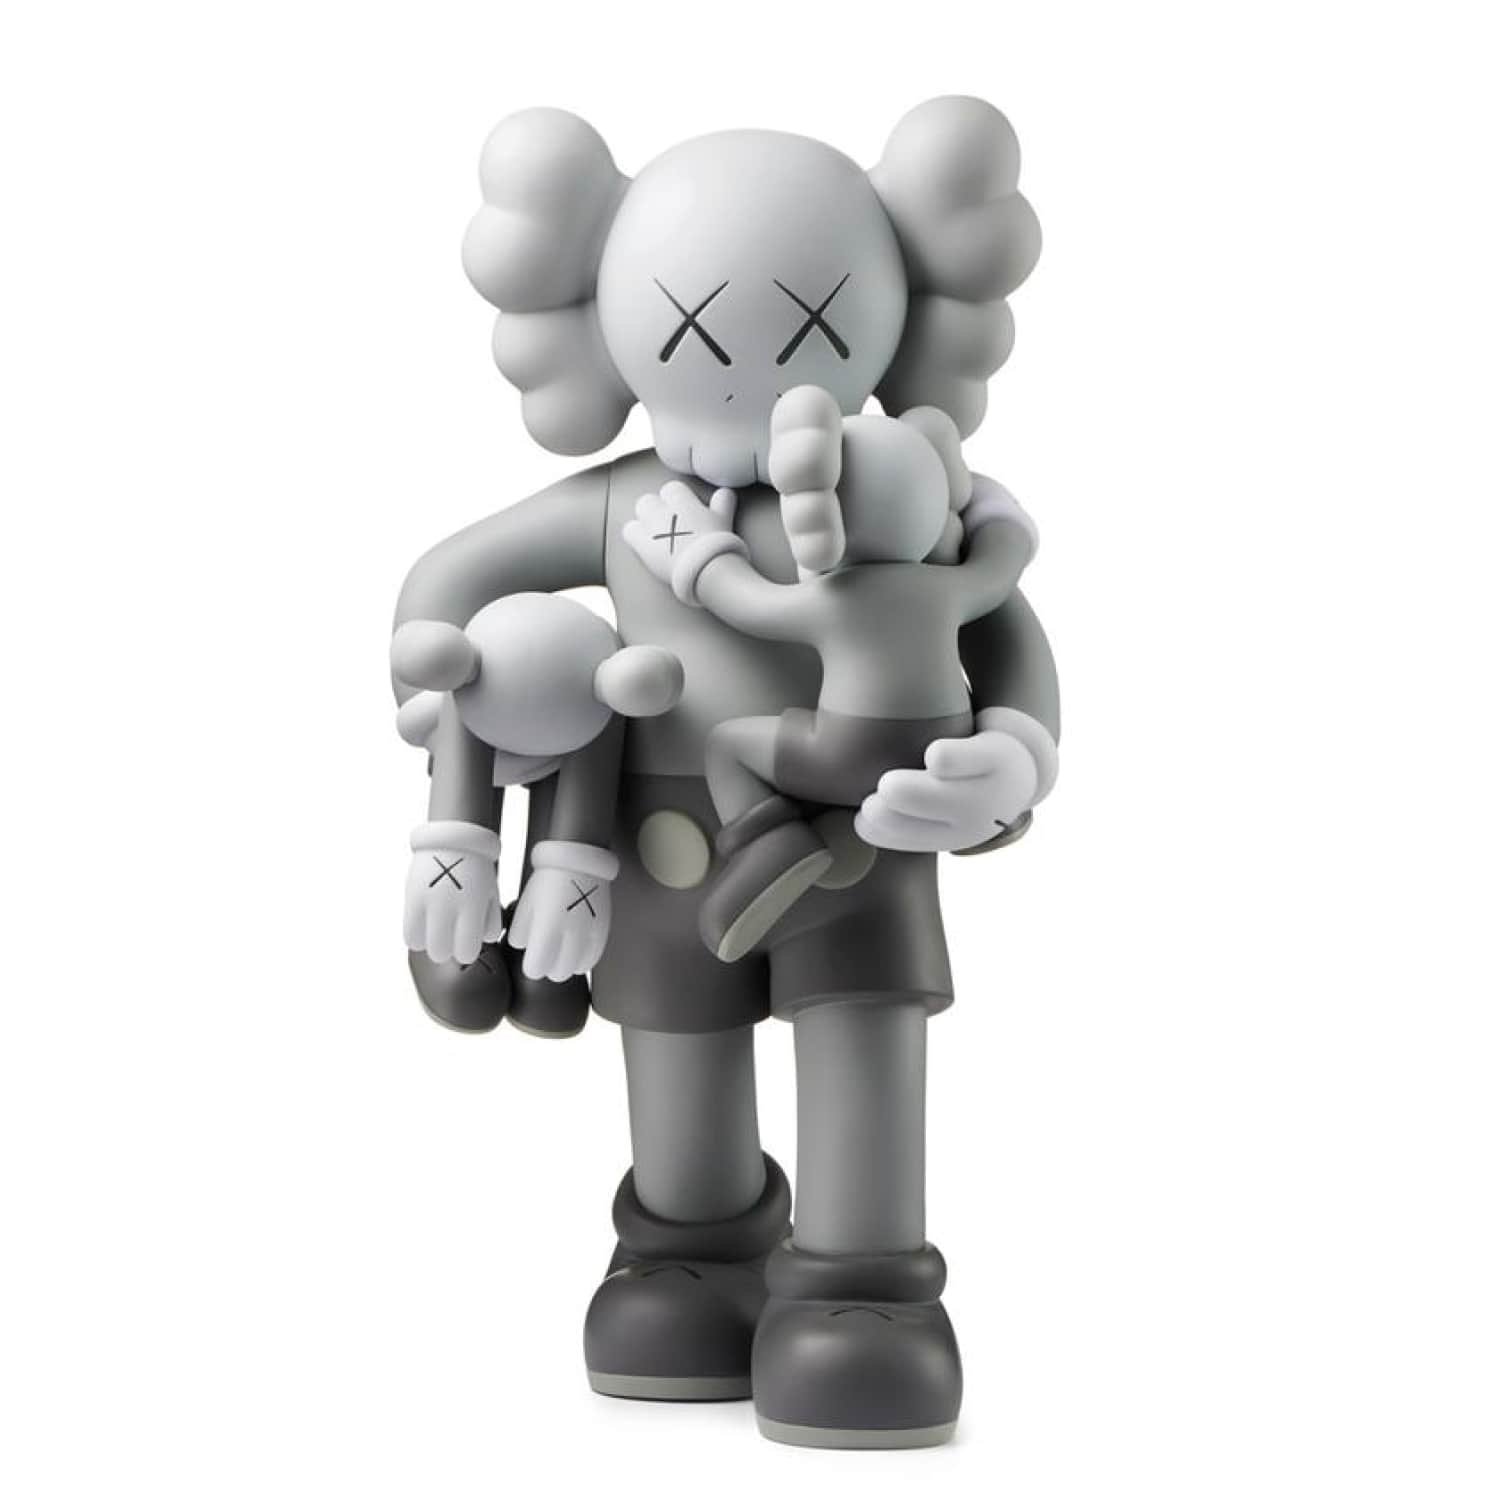 Clean Slate gray figure by Kaws from 2018 - Dope! Gallery